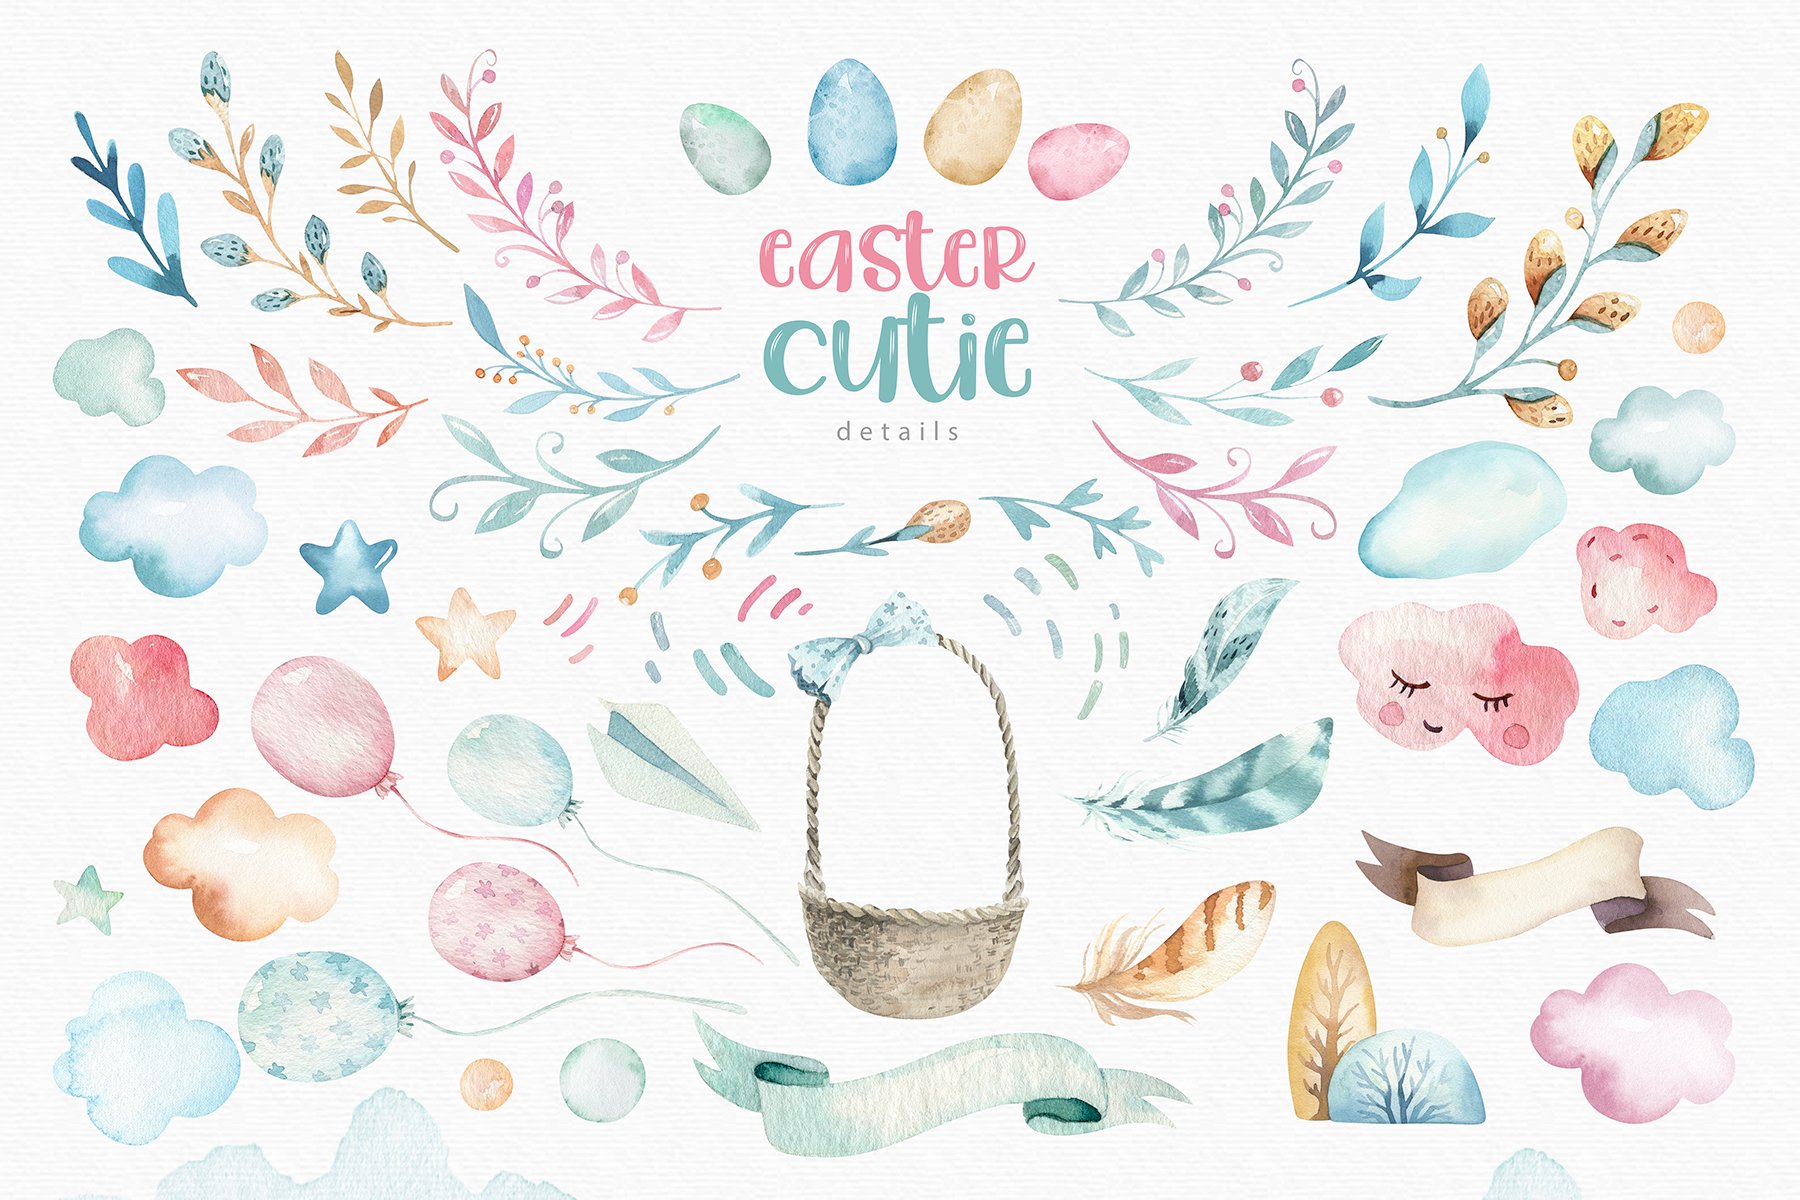 My First Hunt - Easter Cutie